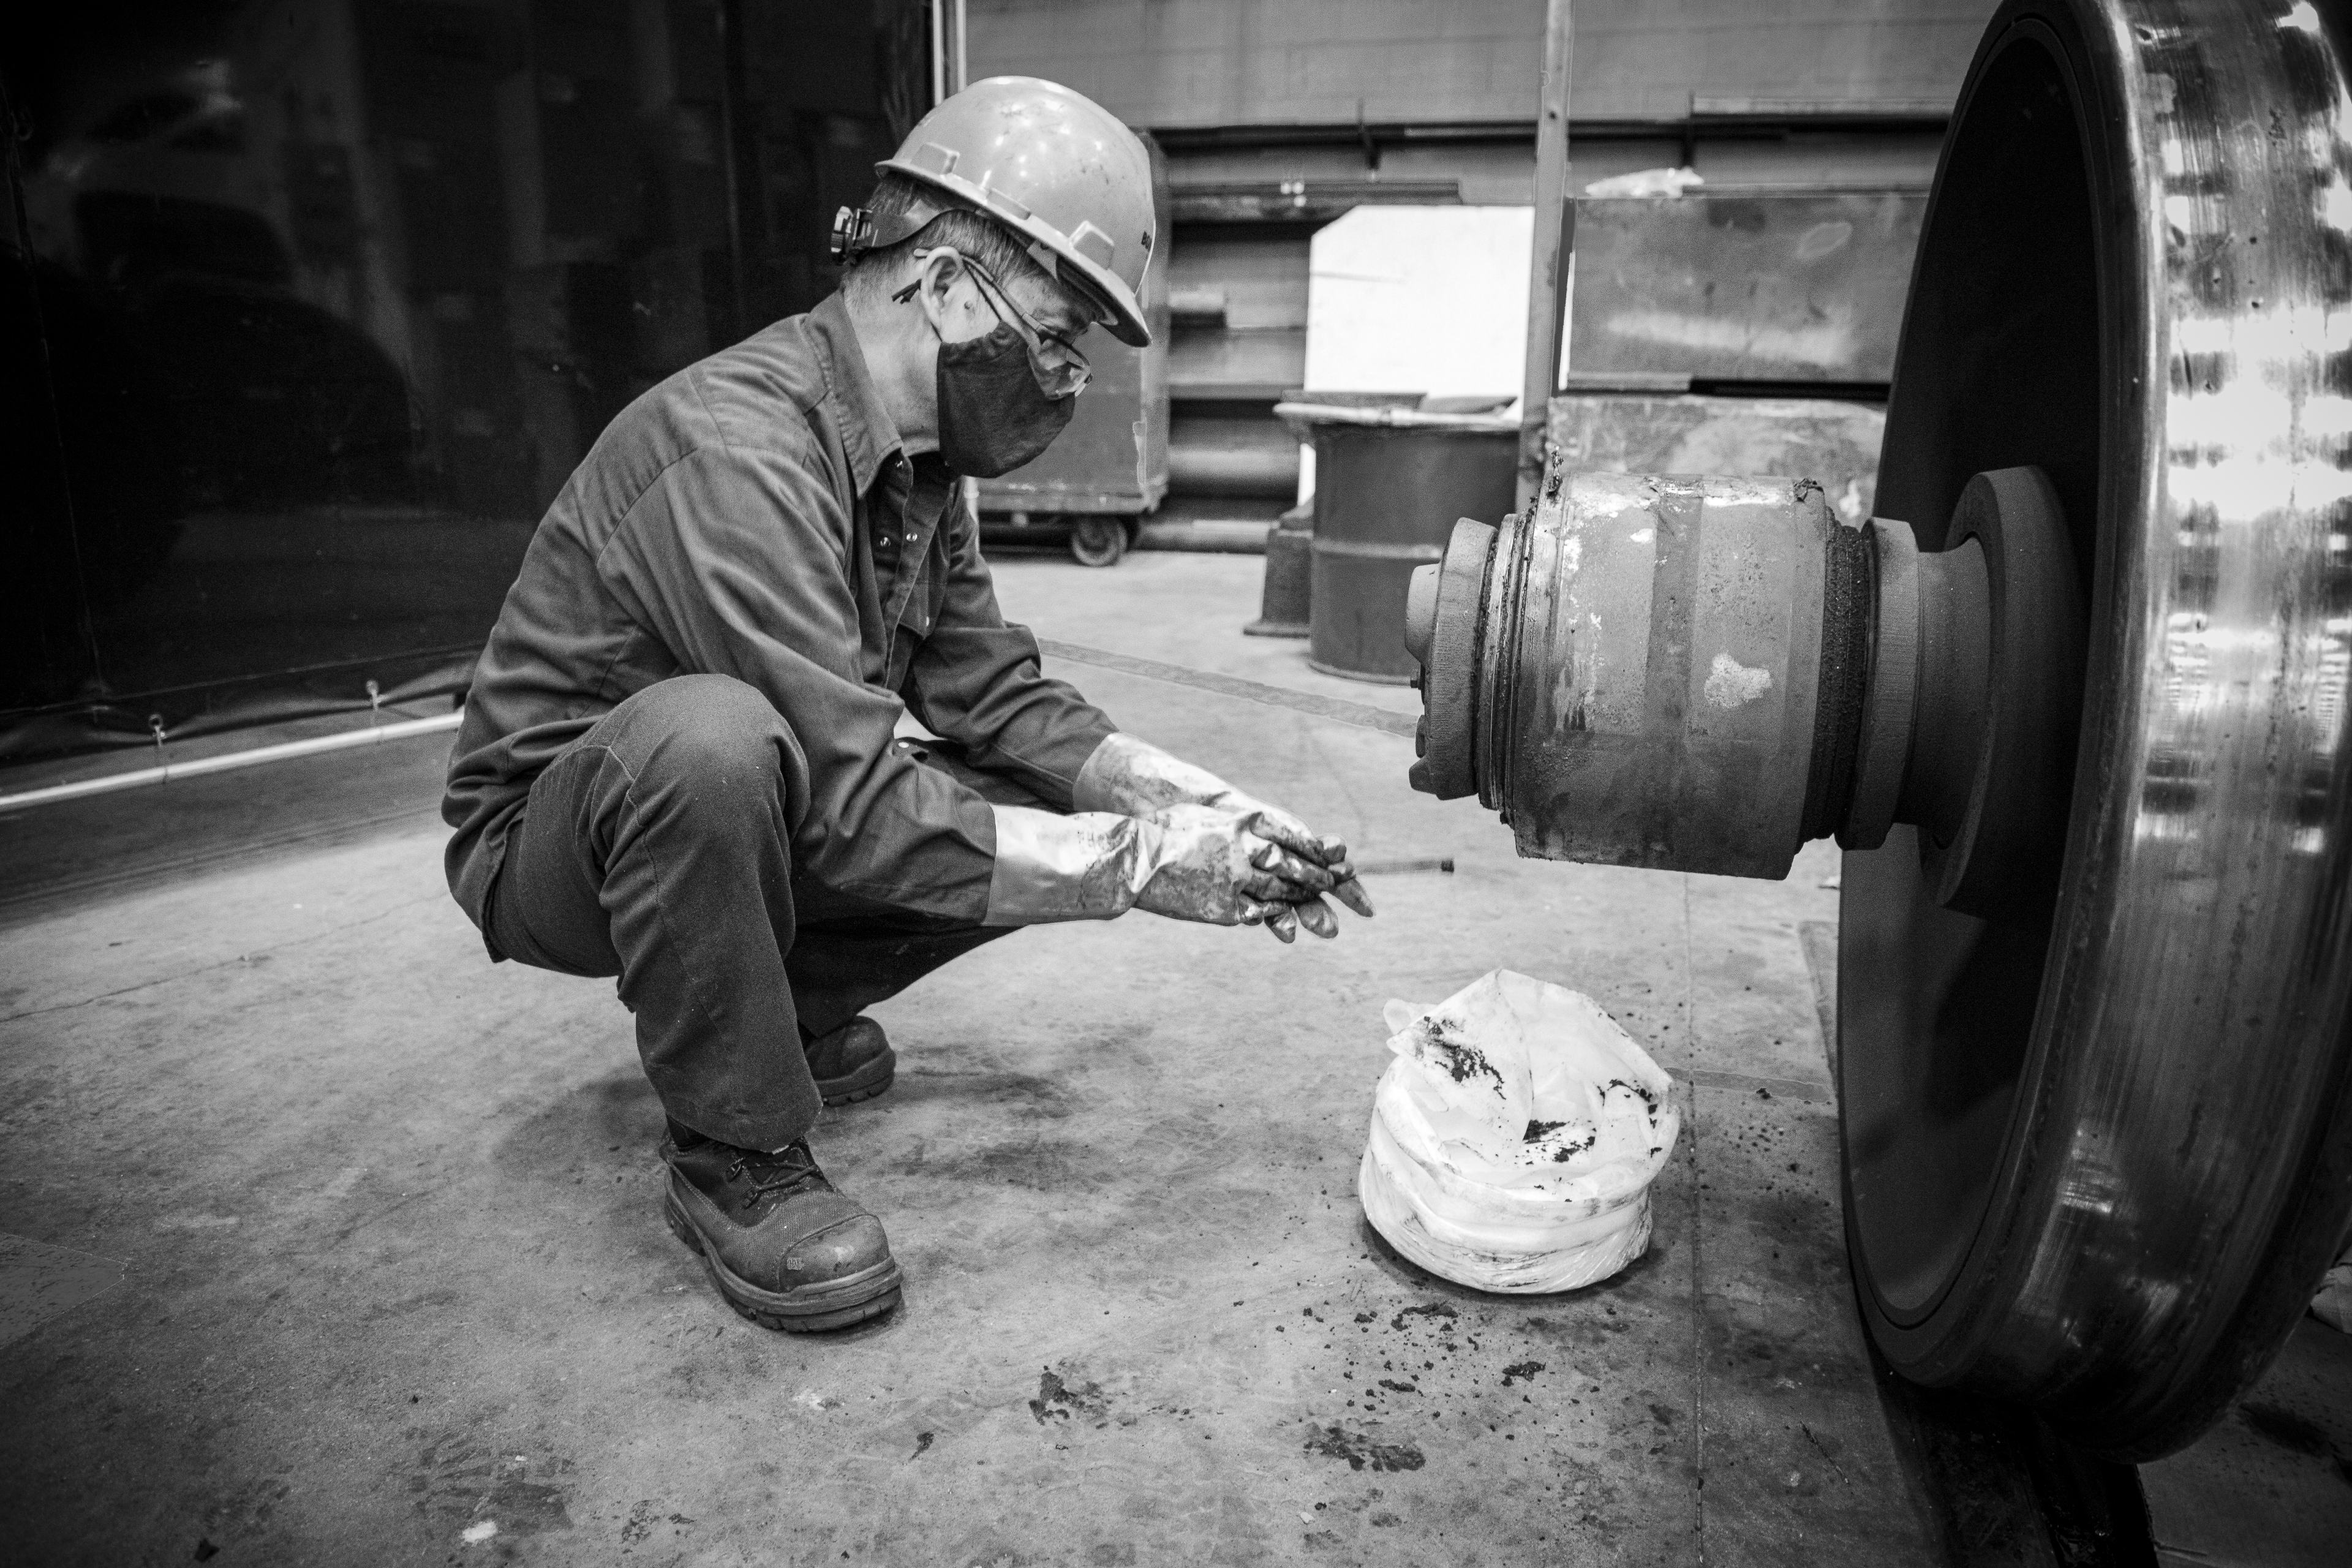 A man kneels down to work on a wheel.